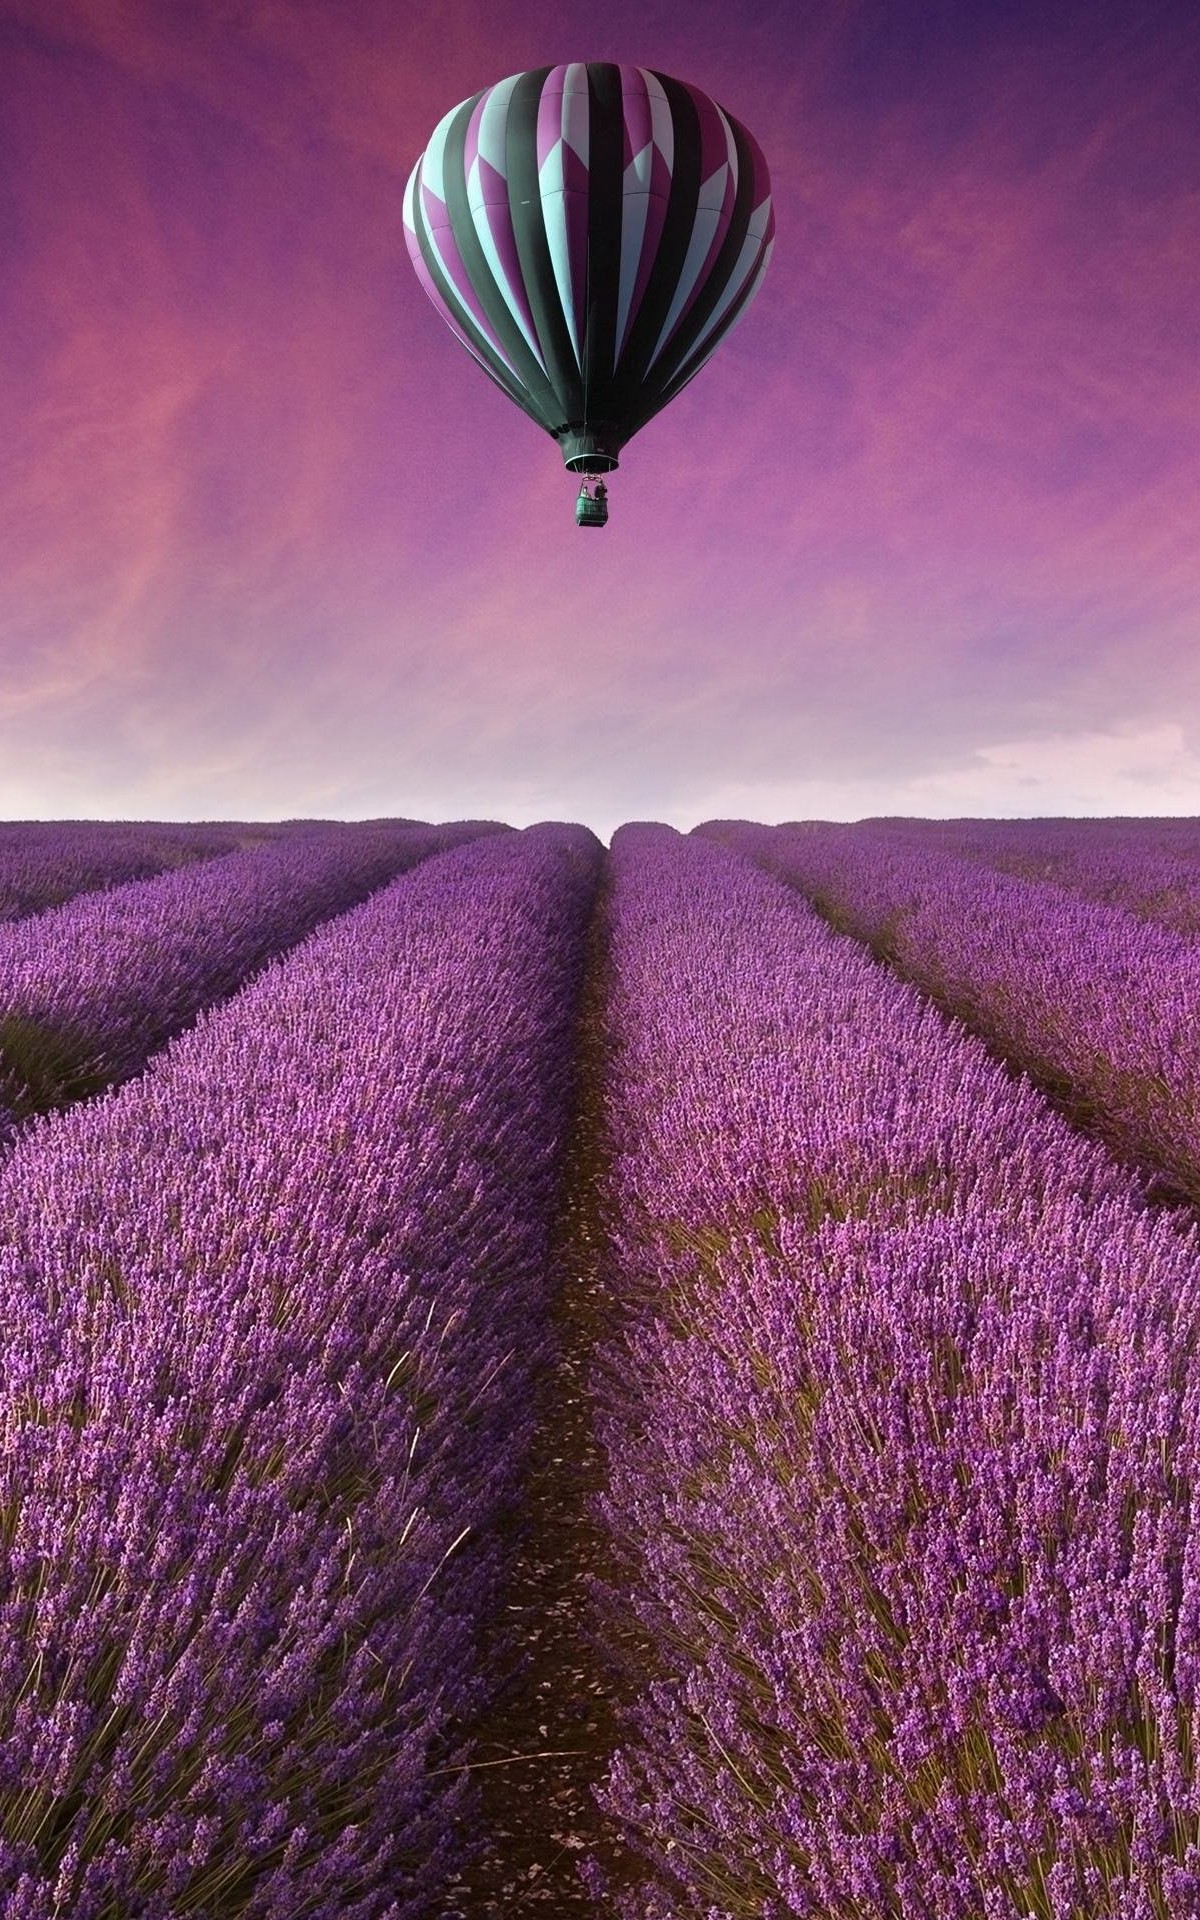 Hot Air Balloon Over Lavender Field Wallpaper for Amazon Kindle Fire HDX